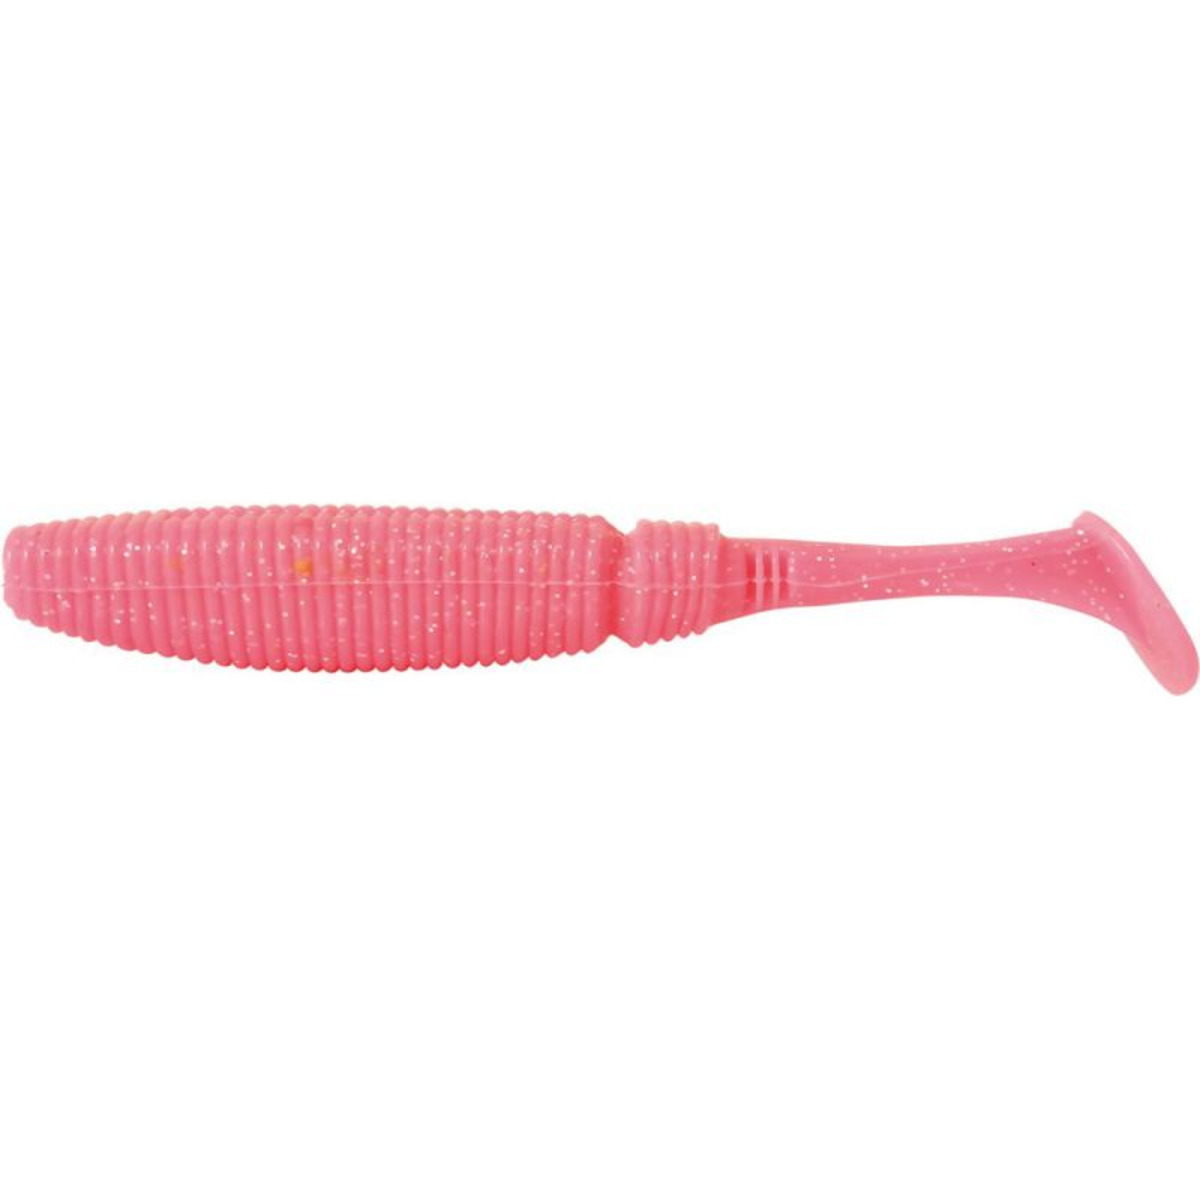 Rapture Power Shad - 7.5 cm - Fluo Pink Silver